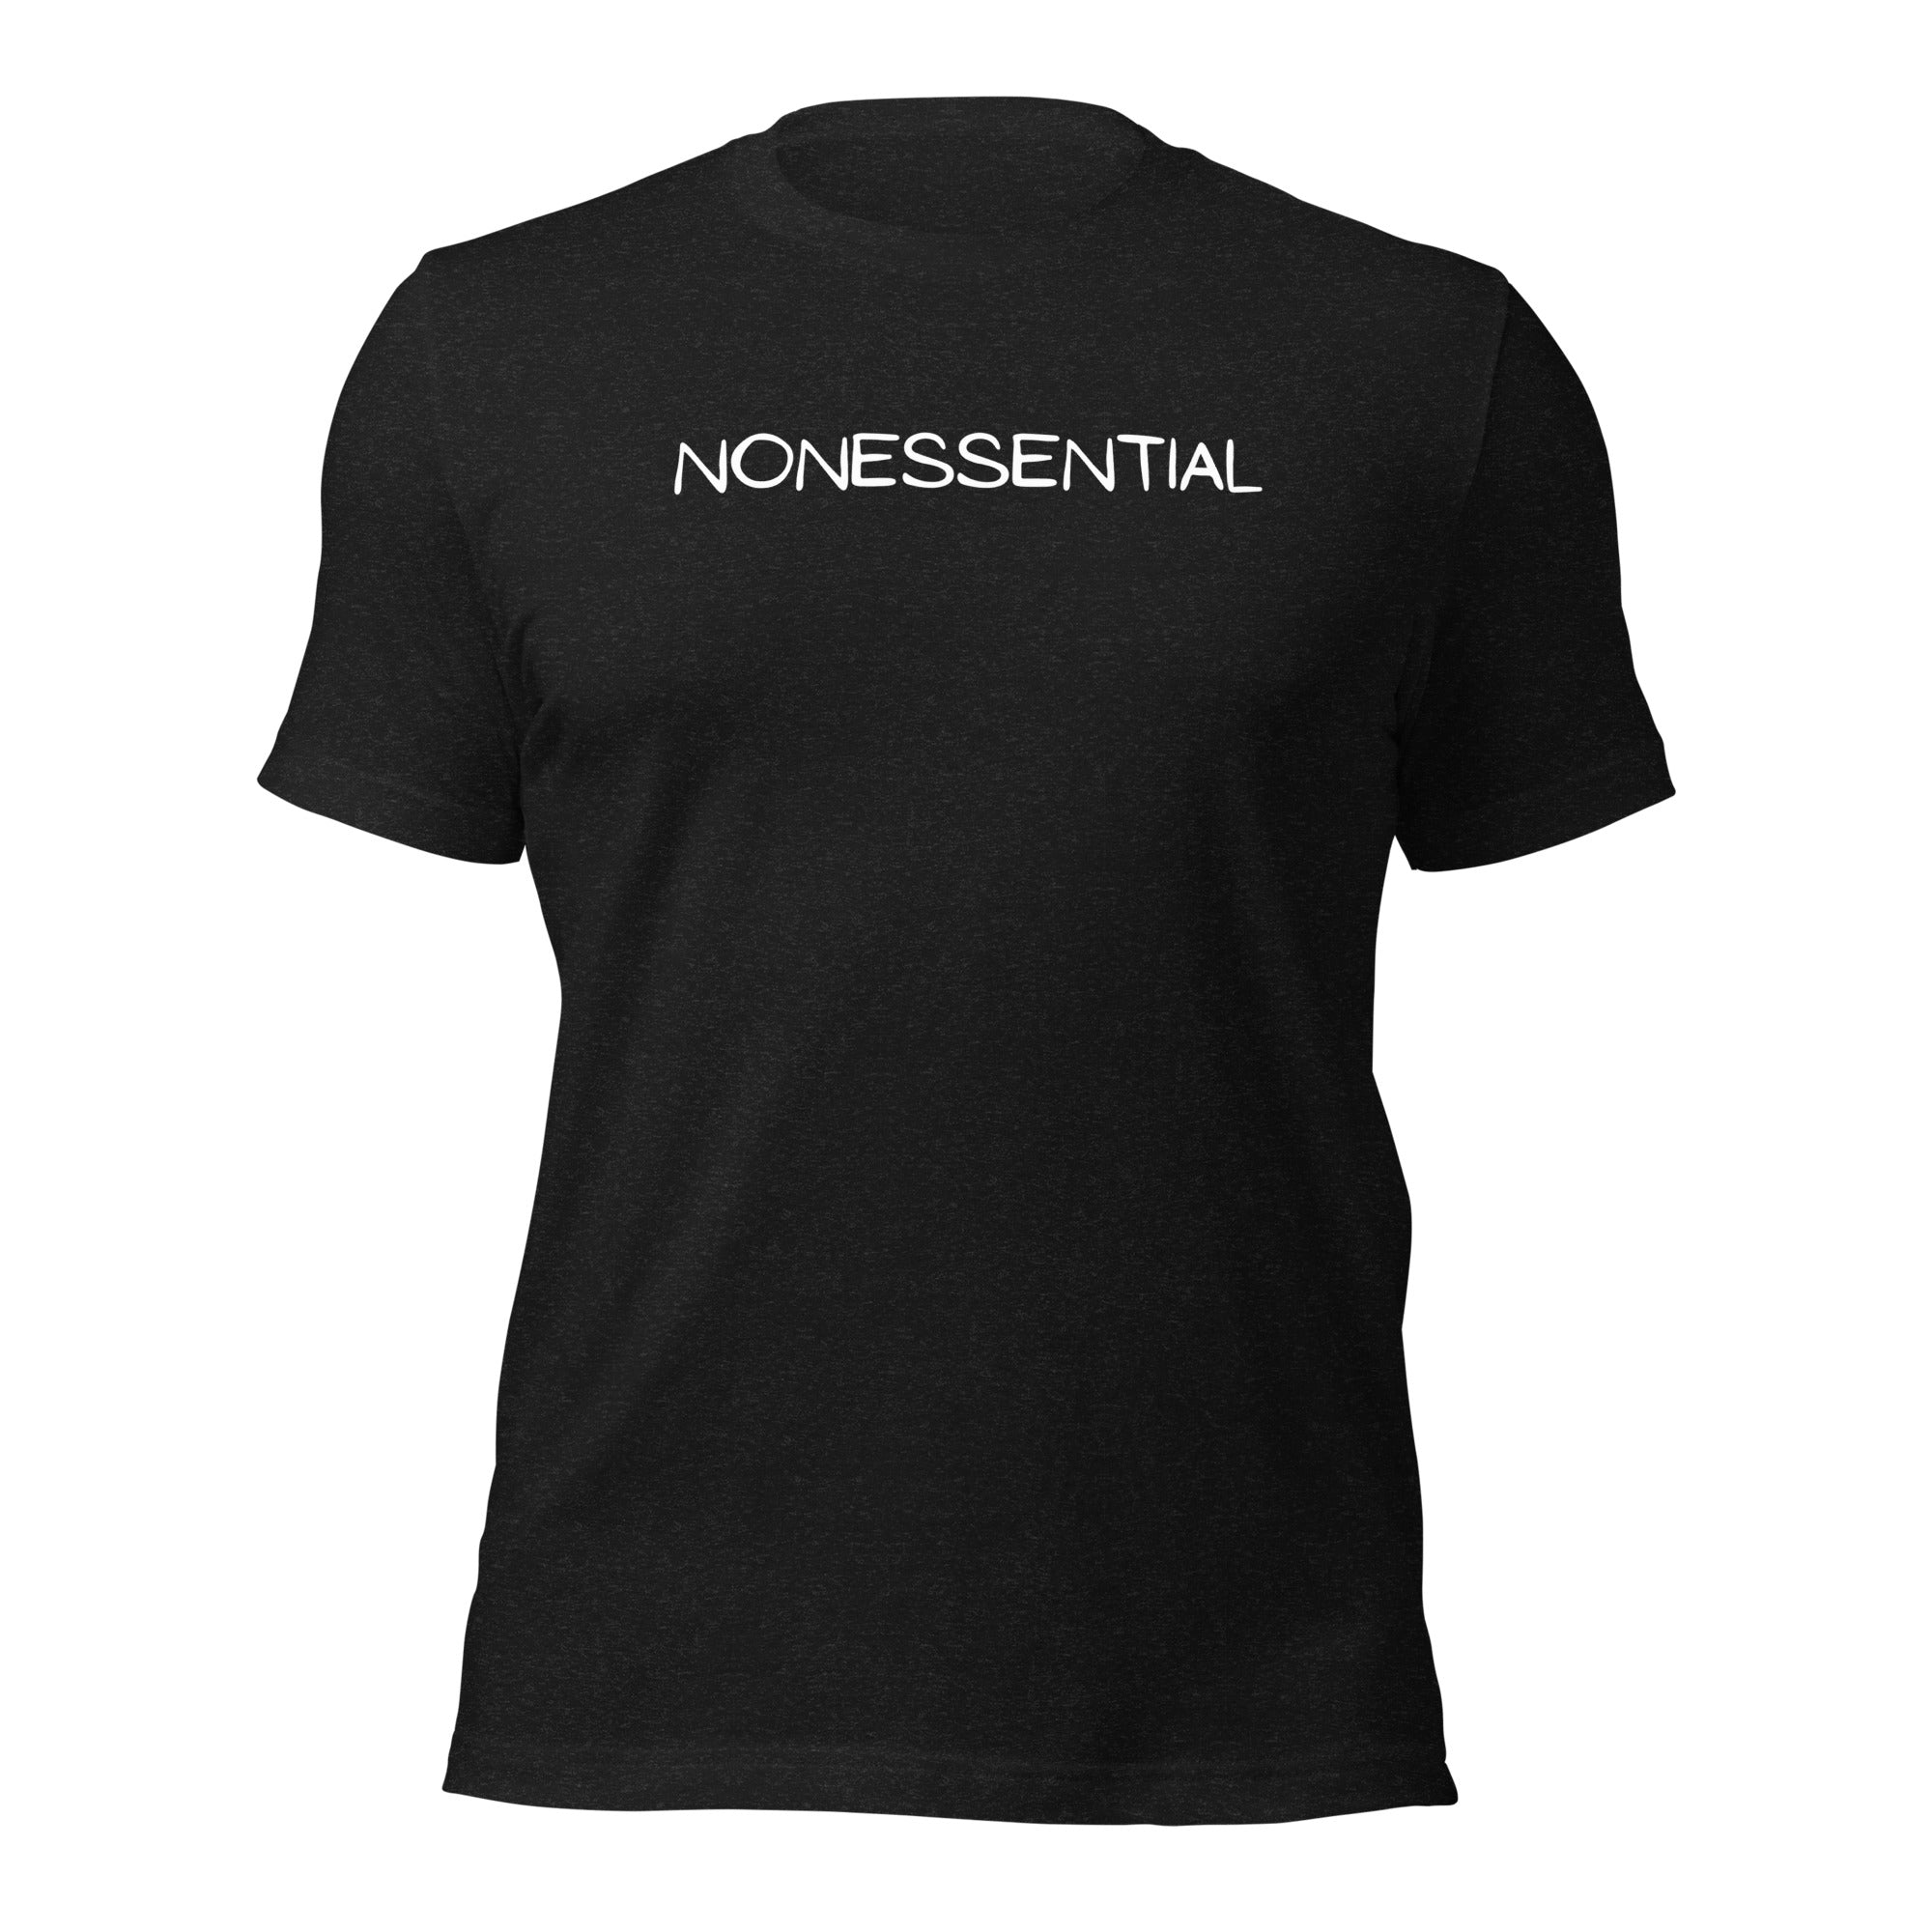 Nonessential Humorous T-Shirt